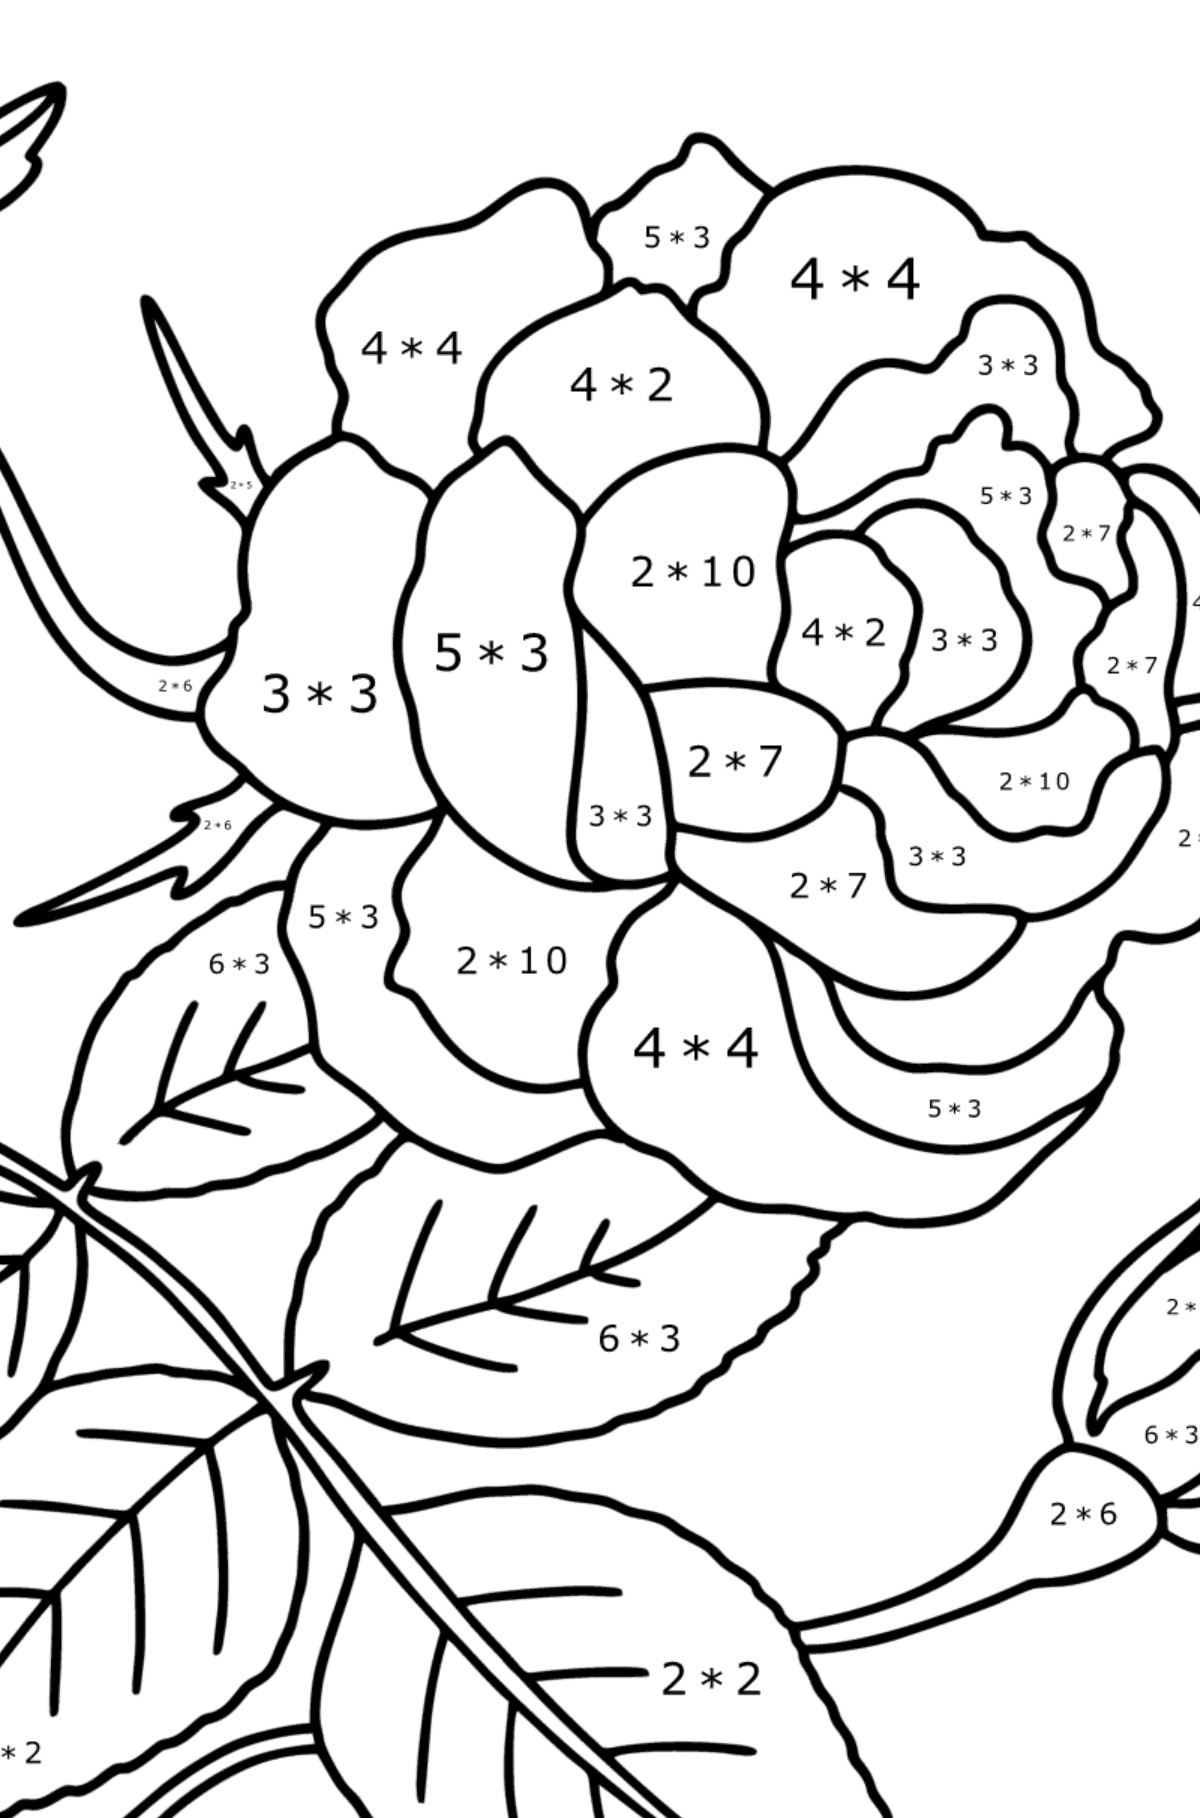 Climbing rose red coloring page - Math Coloring - Multiplication for Kids